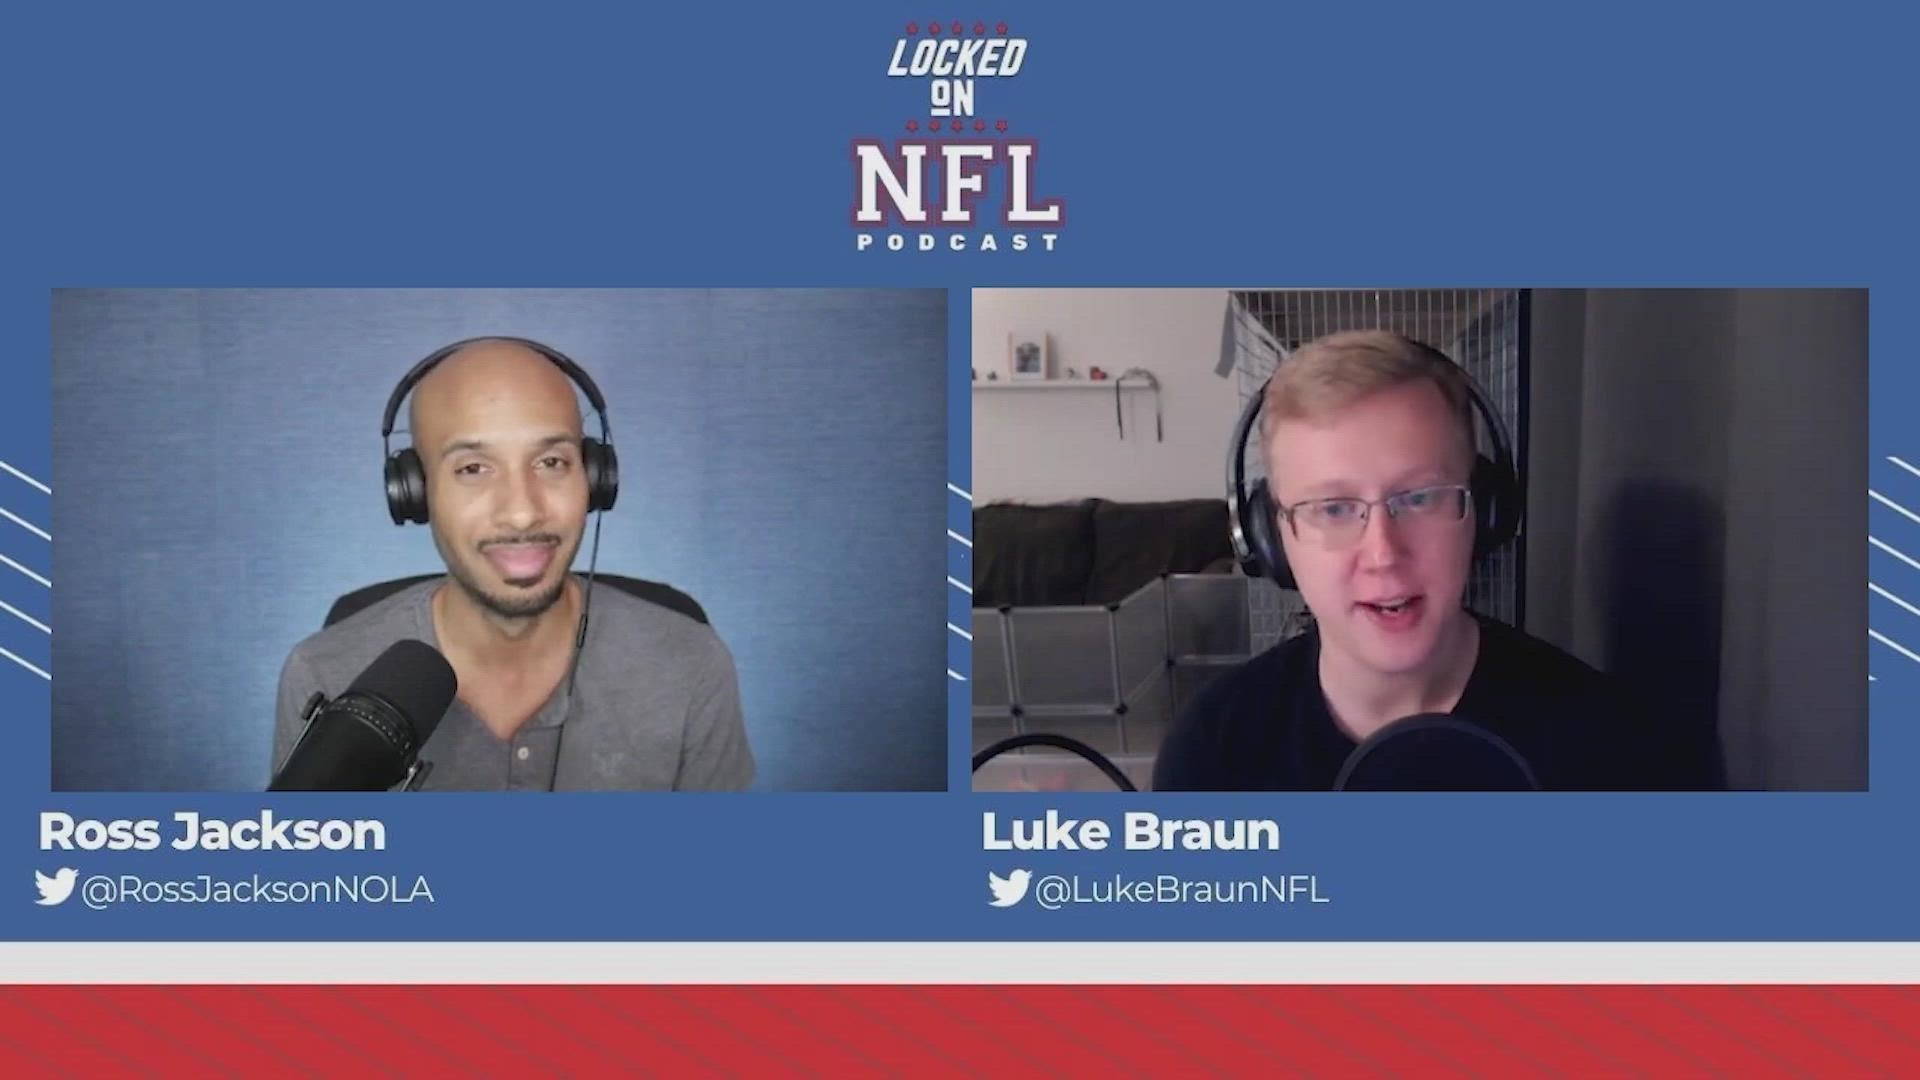 On today's episode of Locked On NFL, we're talking playoff pictures! The NFC and AFC are very tight. We'll look at important playoff tiebreakers and scenarios.